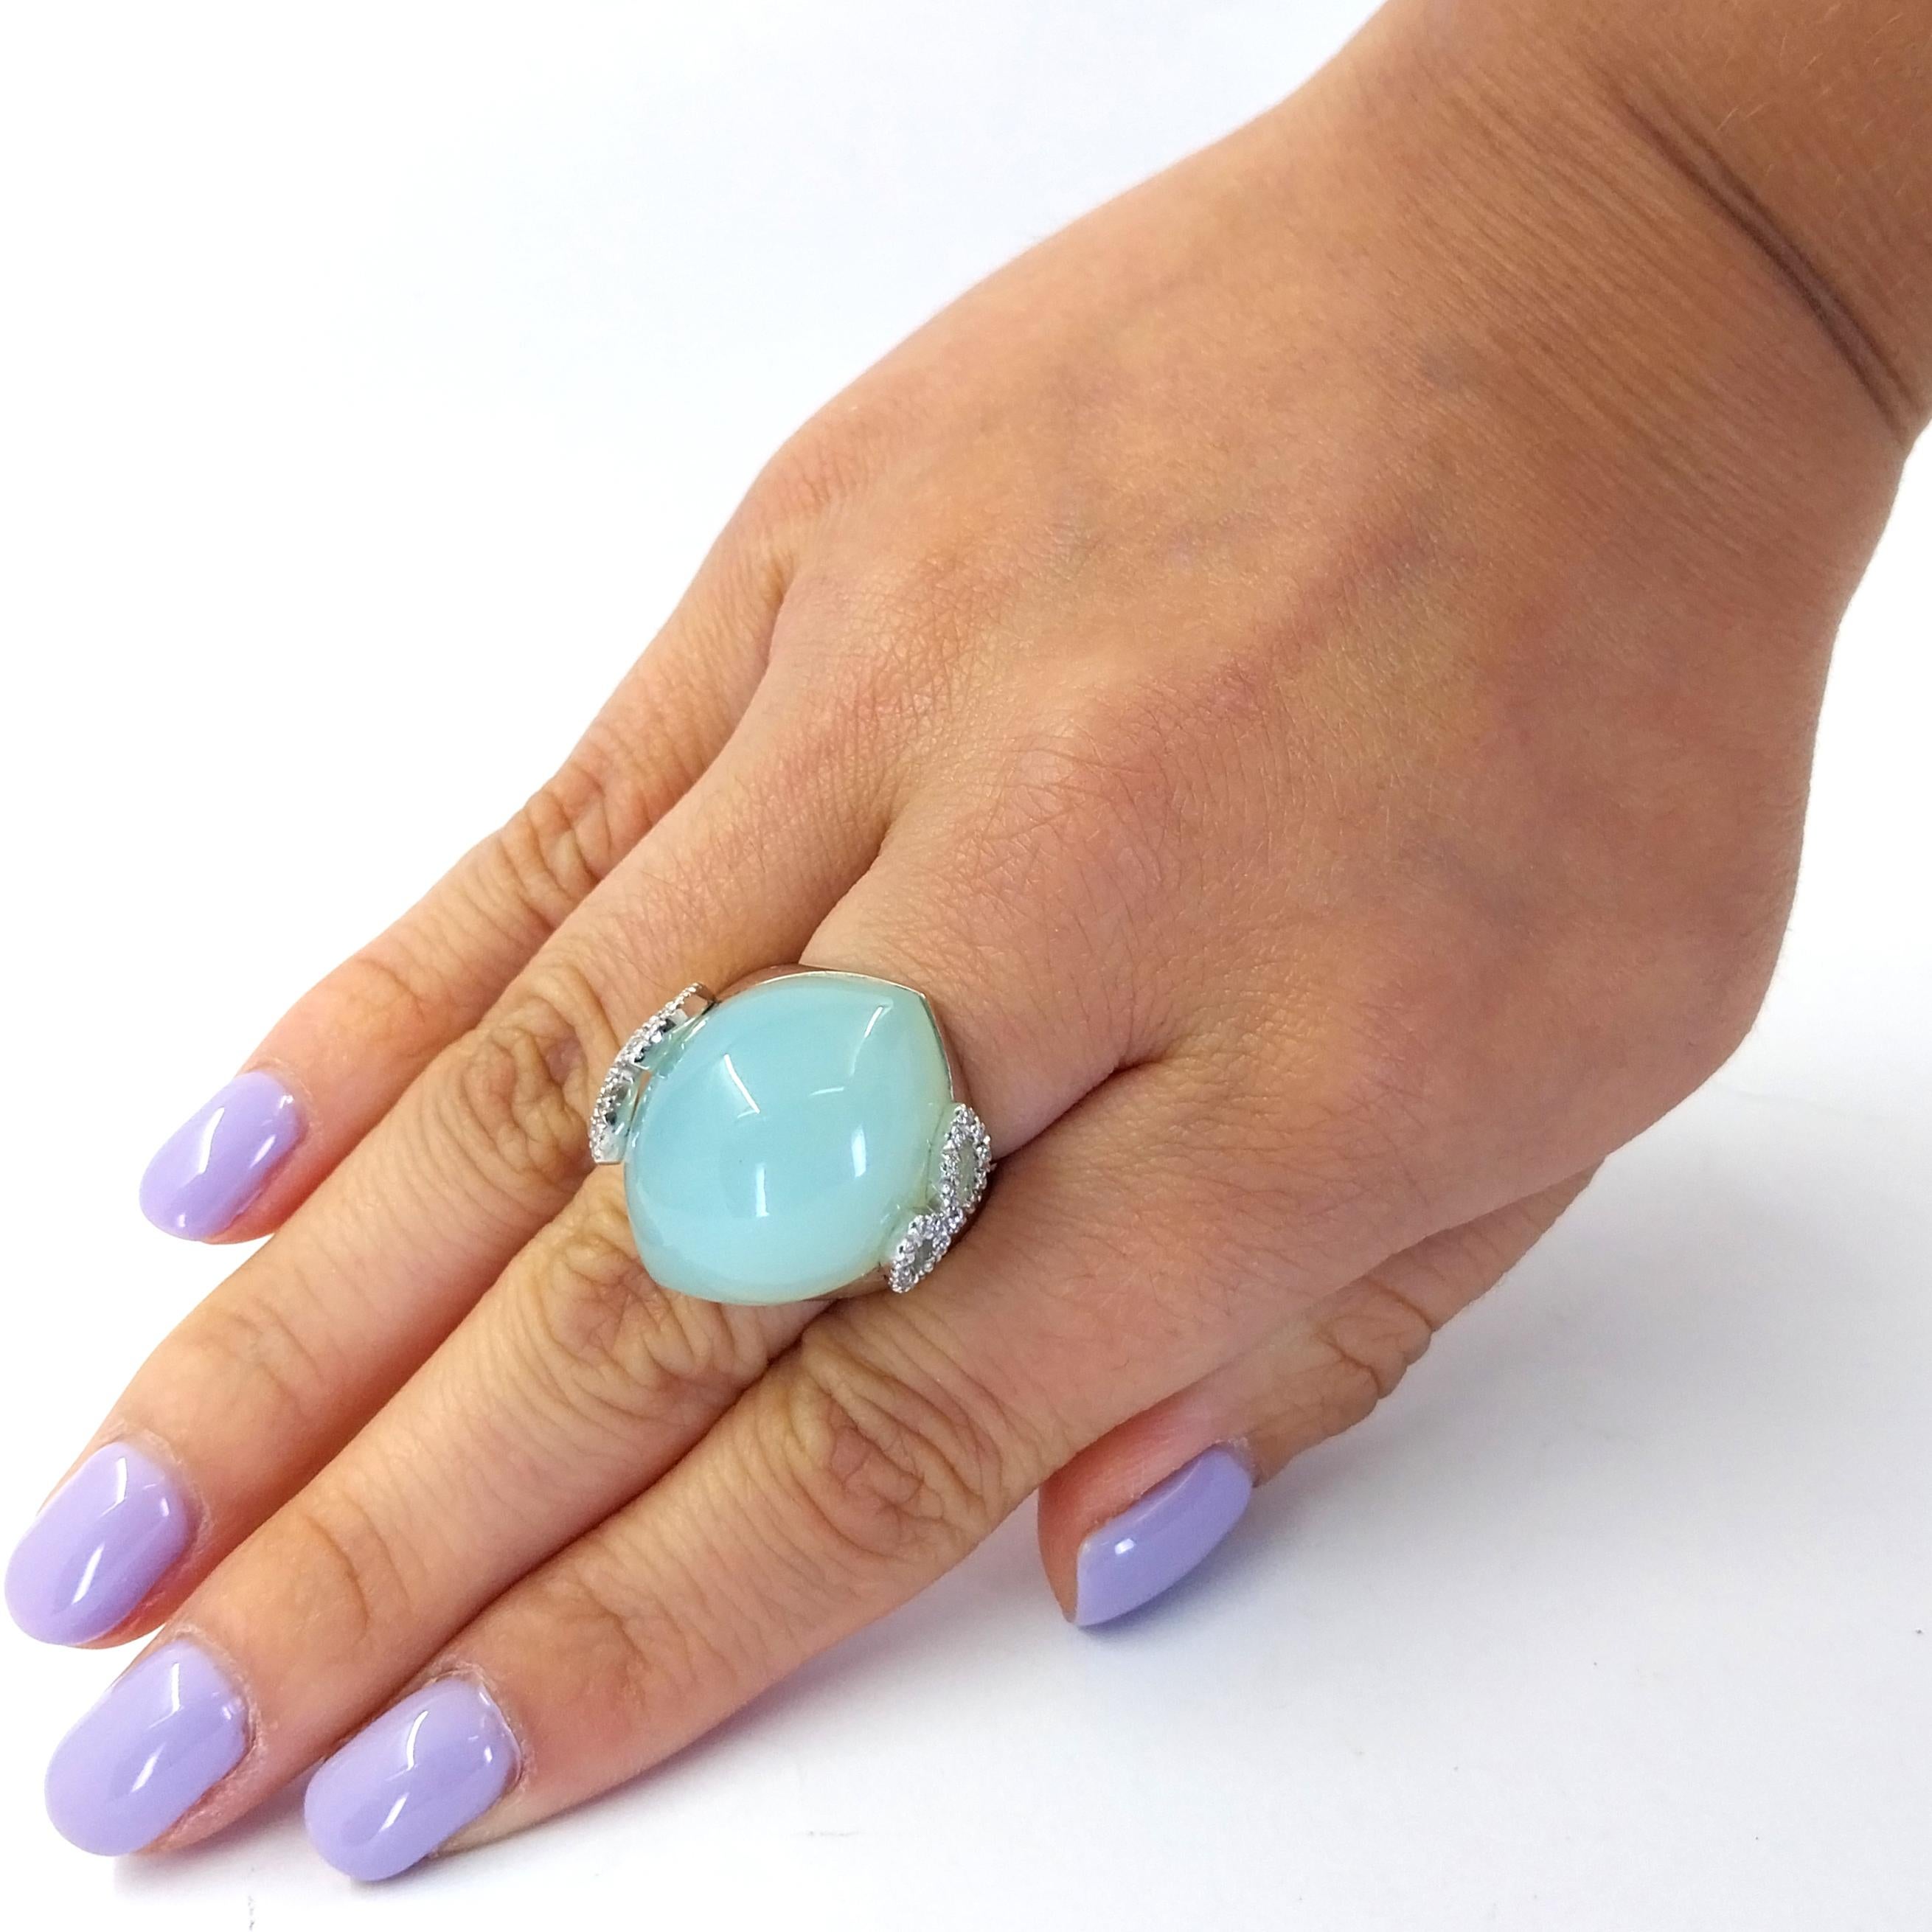 18 Karat White Gold Cocktail Ring Featuring A Cabochon Cut Blue-Green Chalcedony Measuring 24mm x 20mm Accented by 40 Round Diamonds of VS Clarity and G/H Color Totaling 0.25 Carats in a Leaf Design. Adjustable Finger Size 5.5 to 6.5 with Butterfly